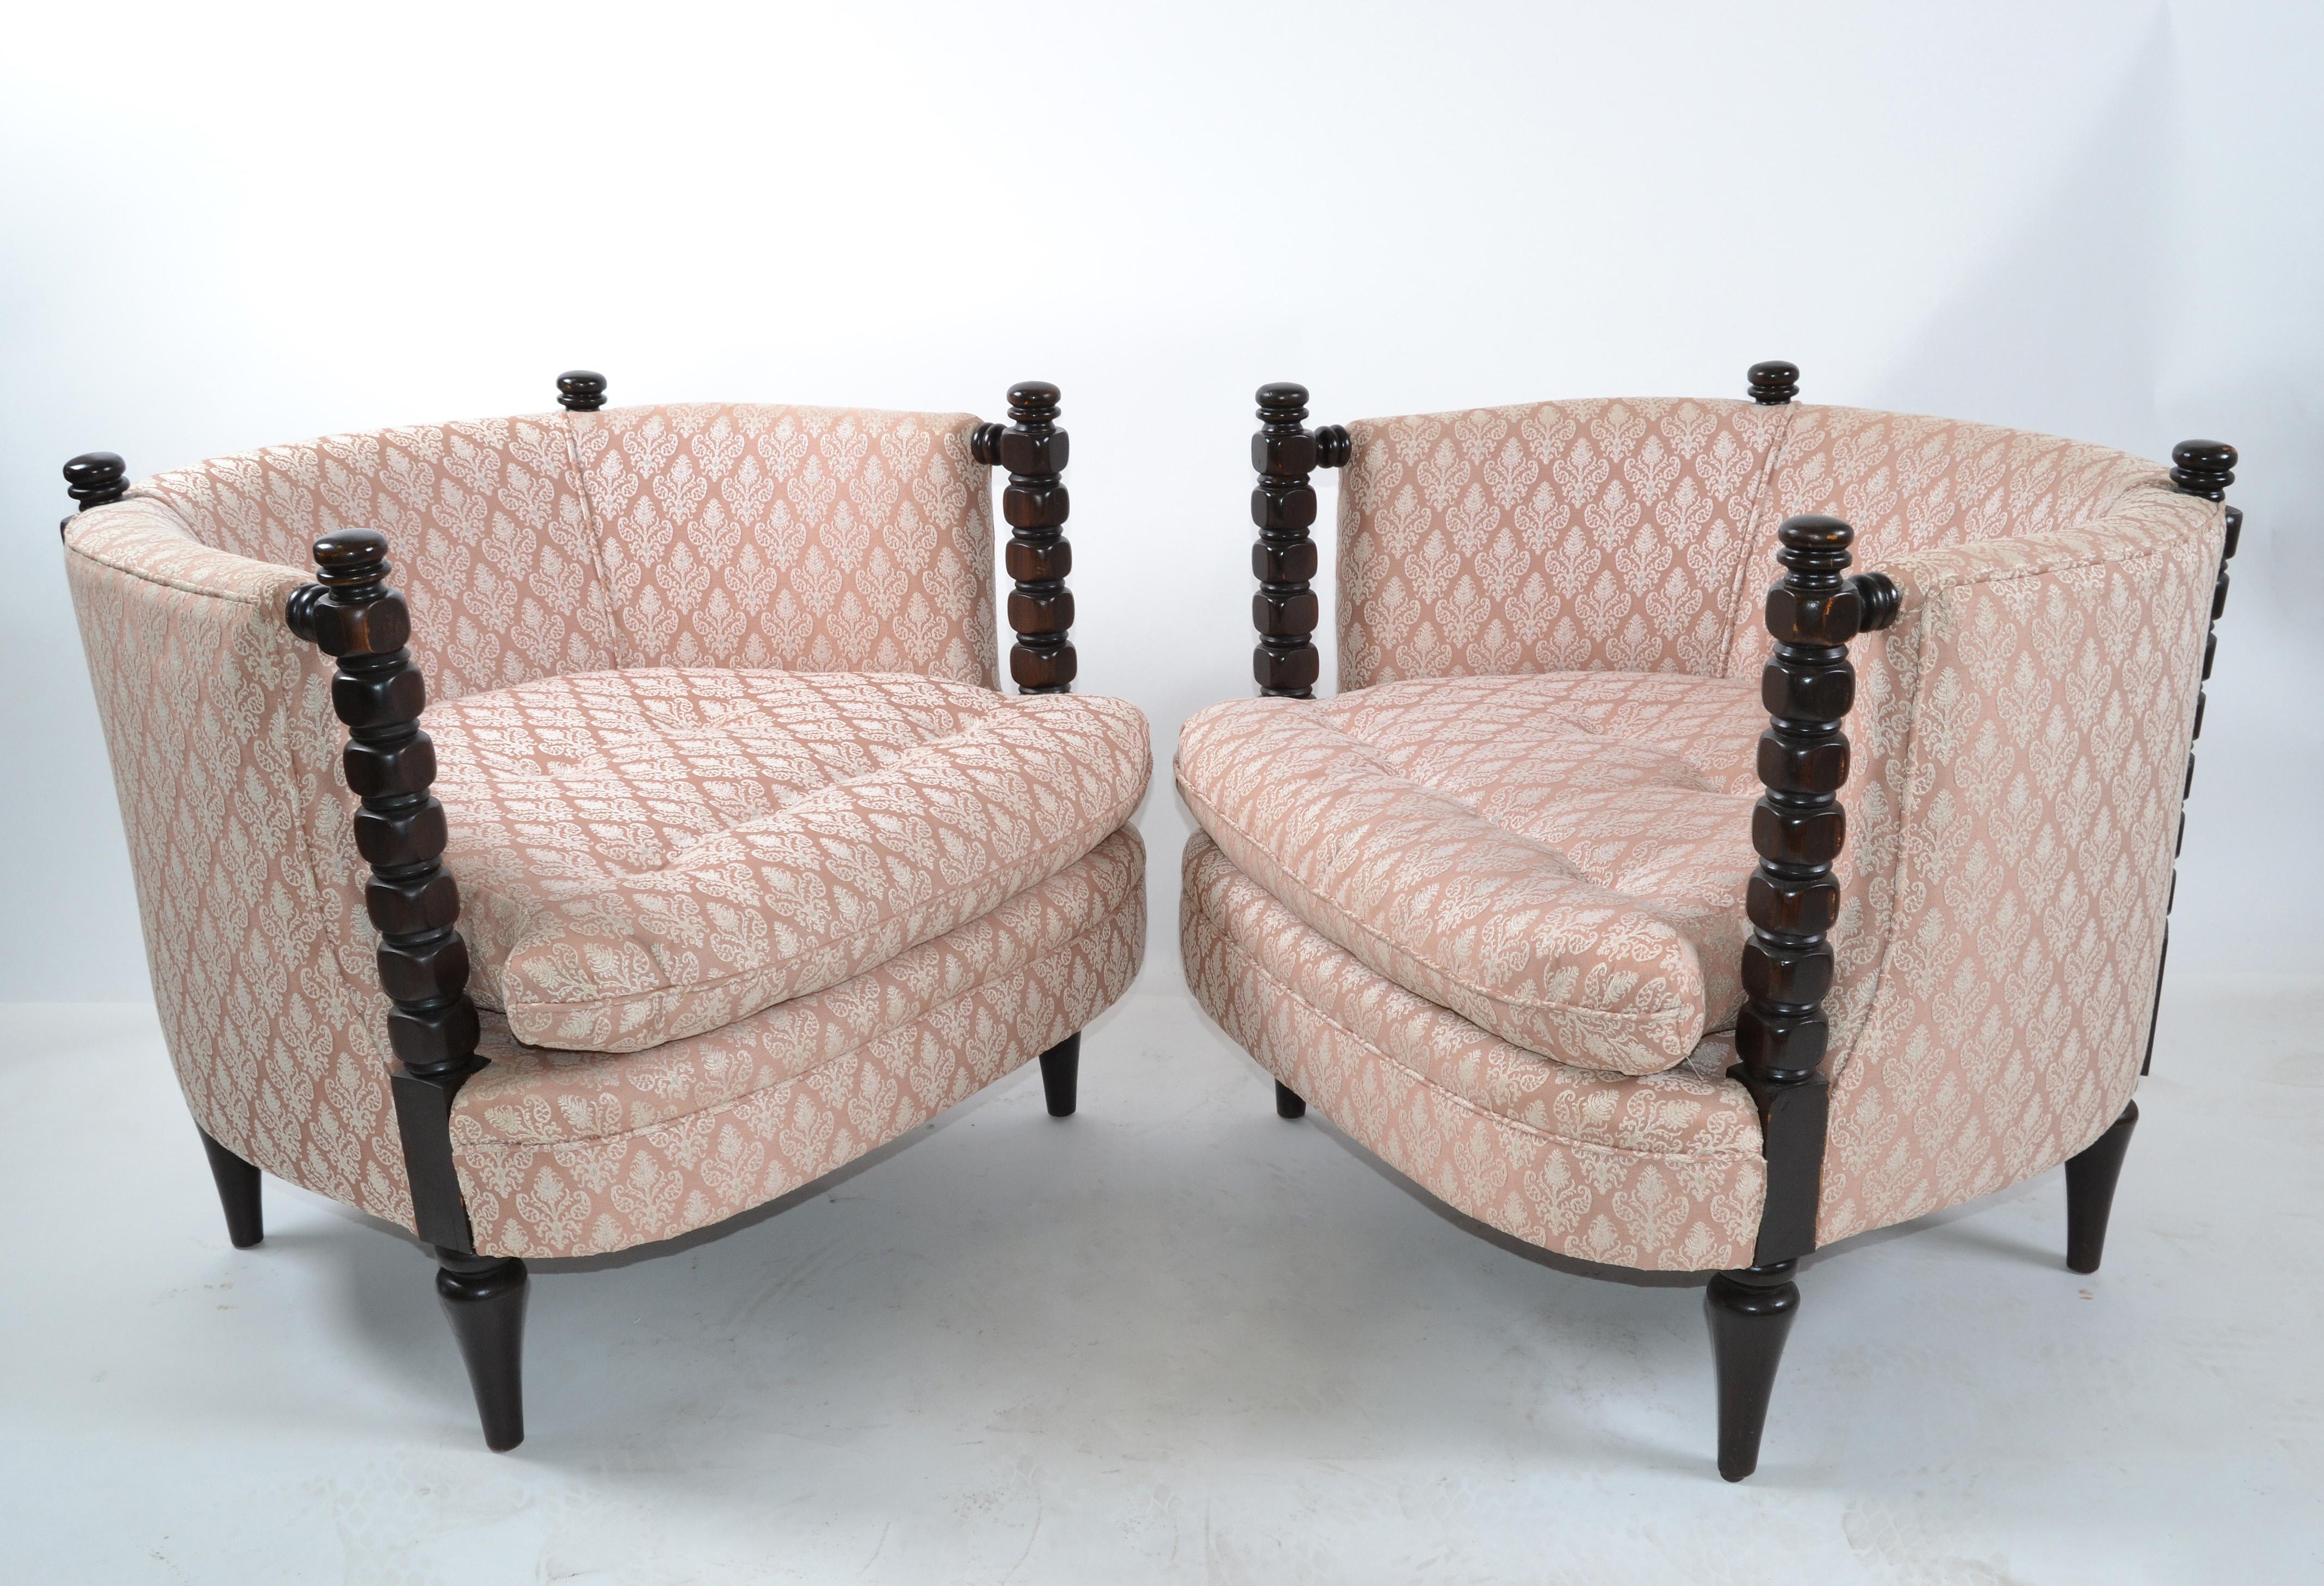 1950s Turned Wood and Tufted Fabric Upholstery Barrel Chairs, Club Chairs, Pair 8